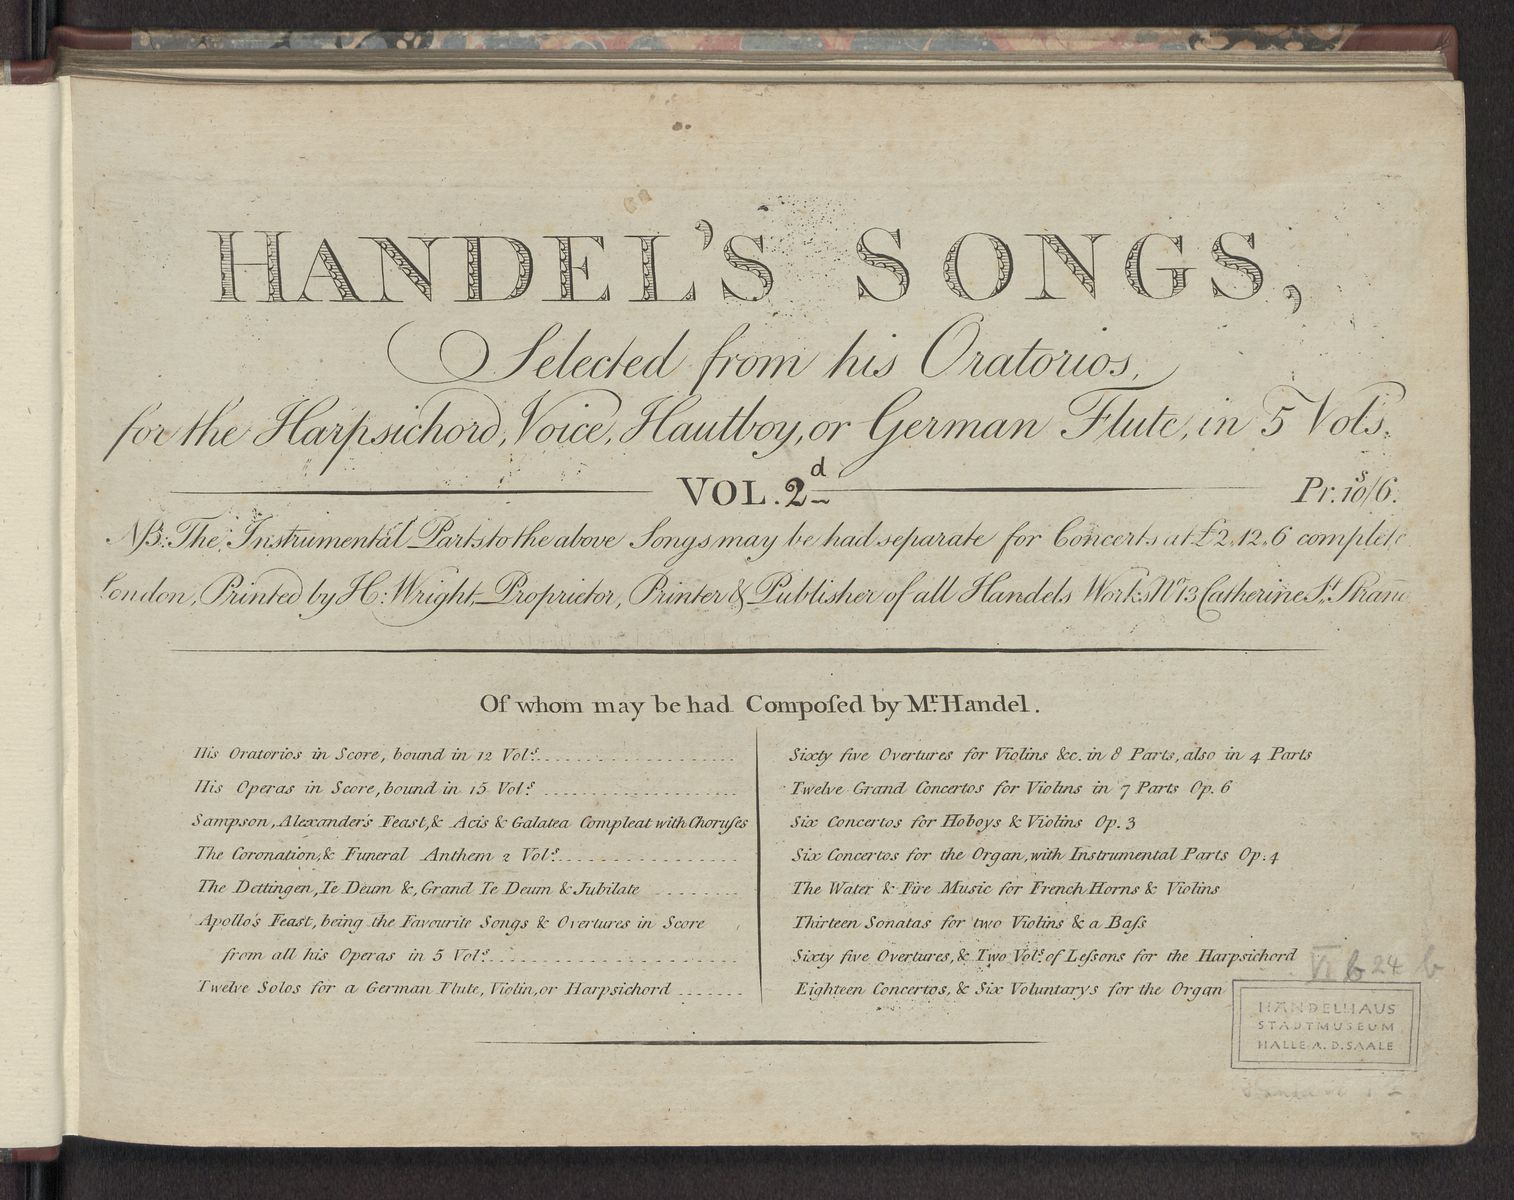 Handel’s Songs Selected from his Oratorios : for the Harpsichord, Voice, Hautboy, or German Flute ... ; Vol. 2, Abbildung 6 (Stiftung Händel-Haus Halle CC BY-NC-SA)